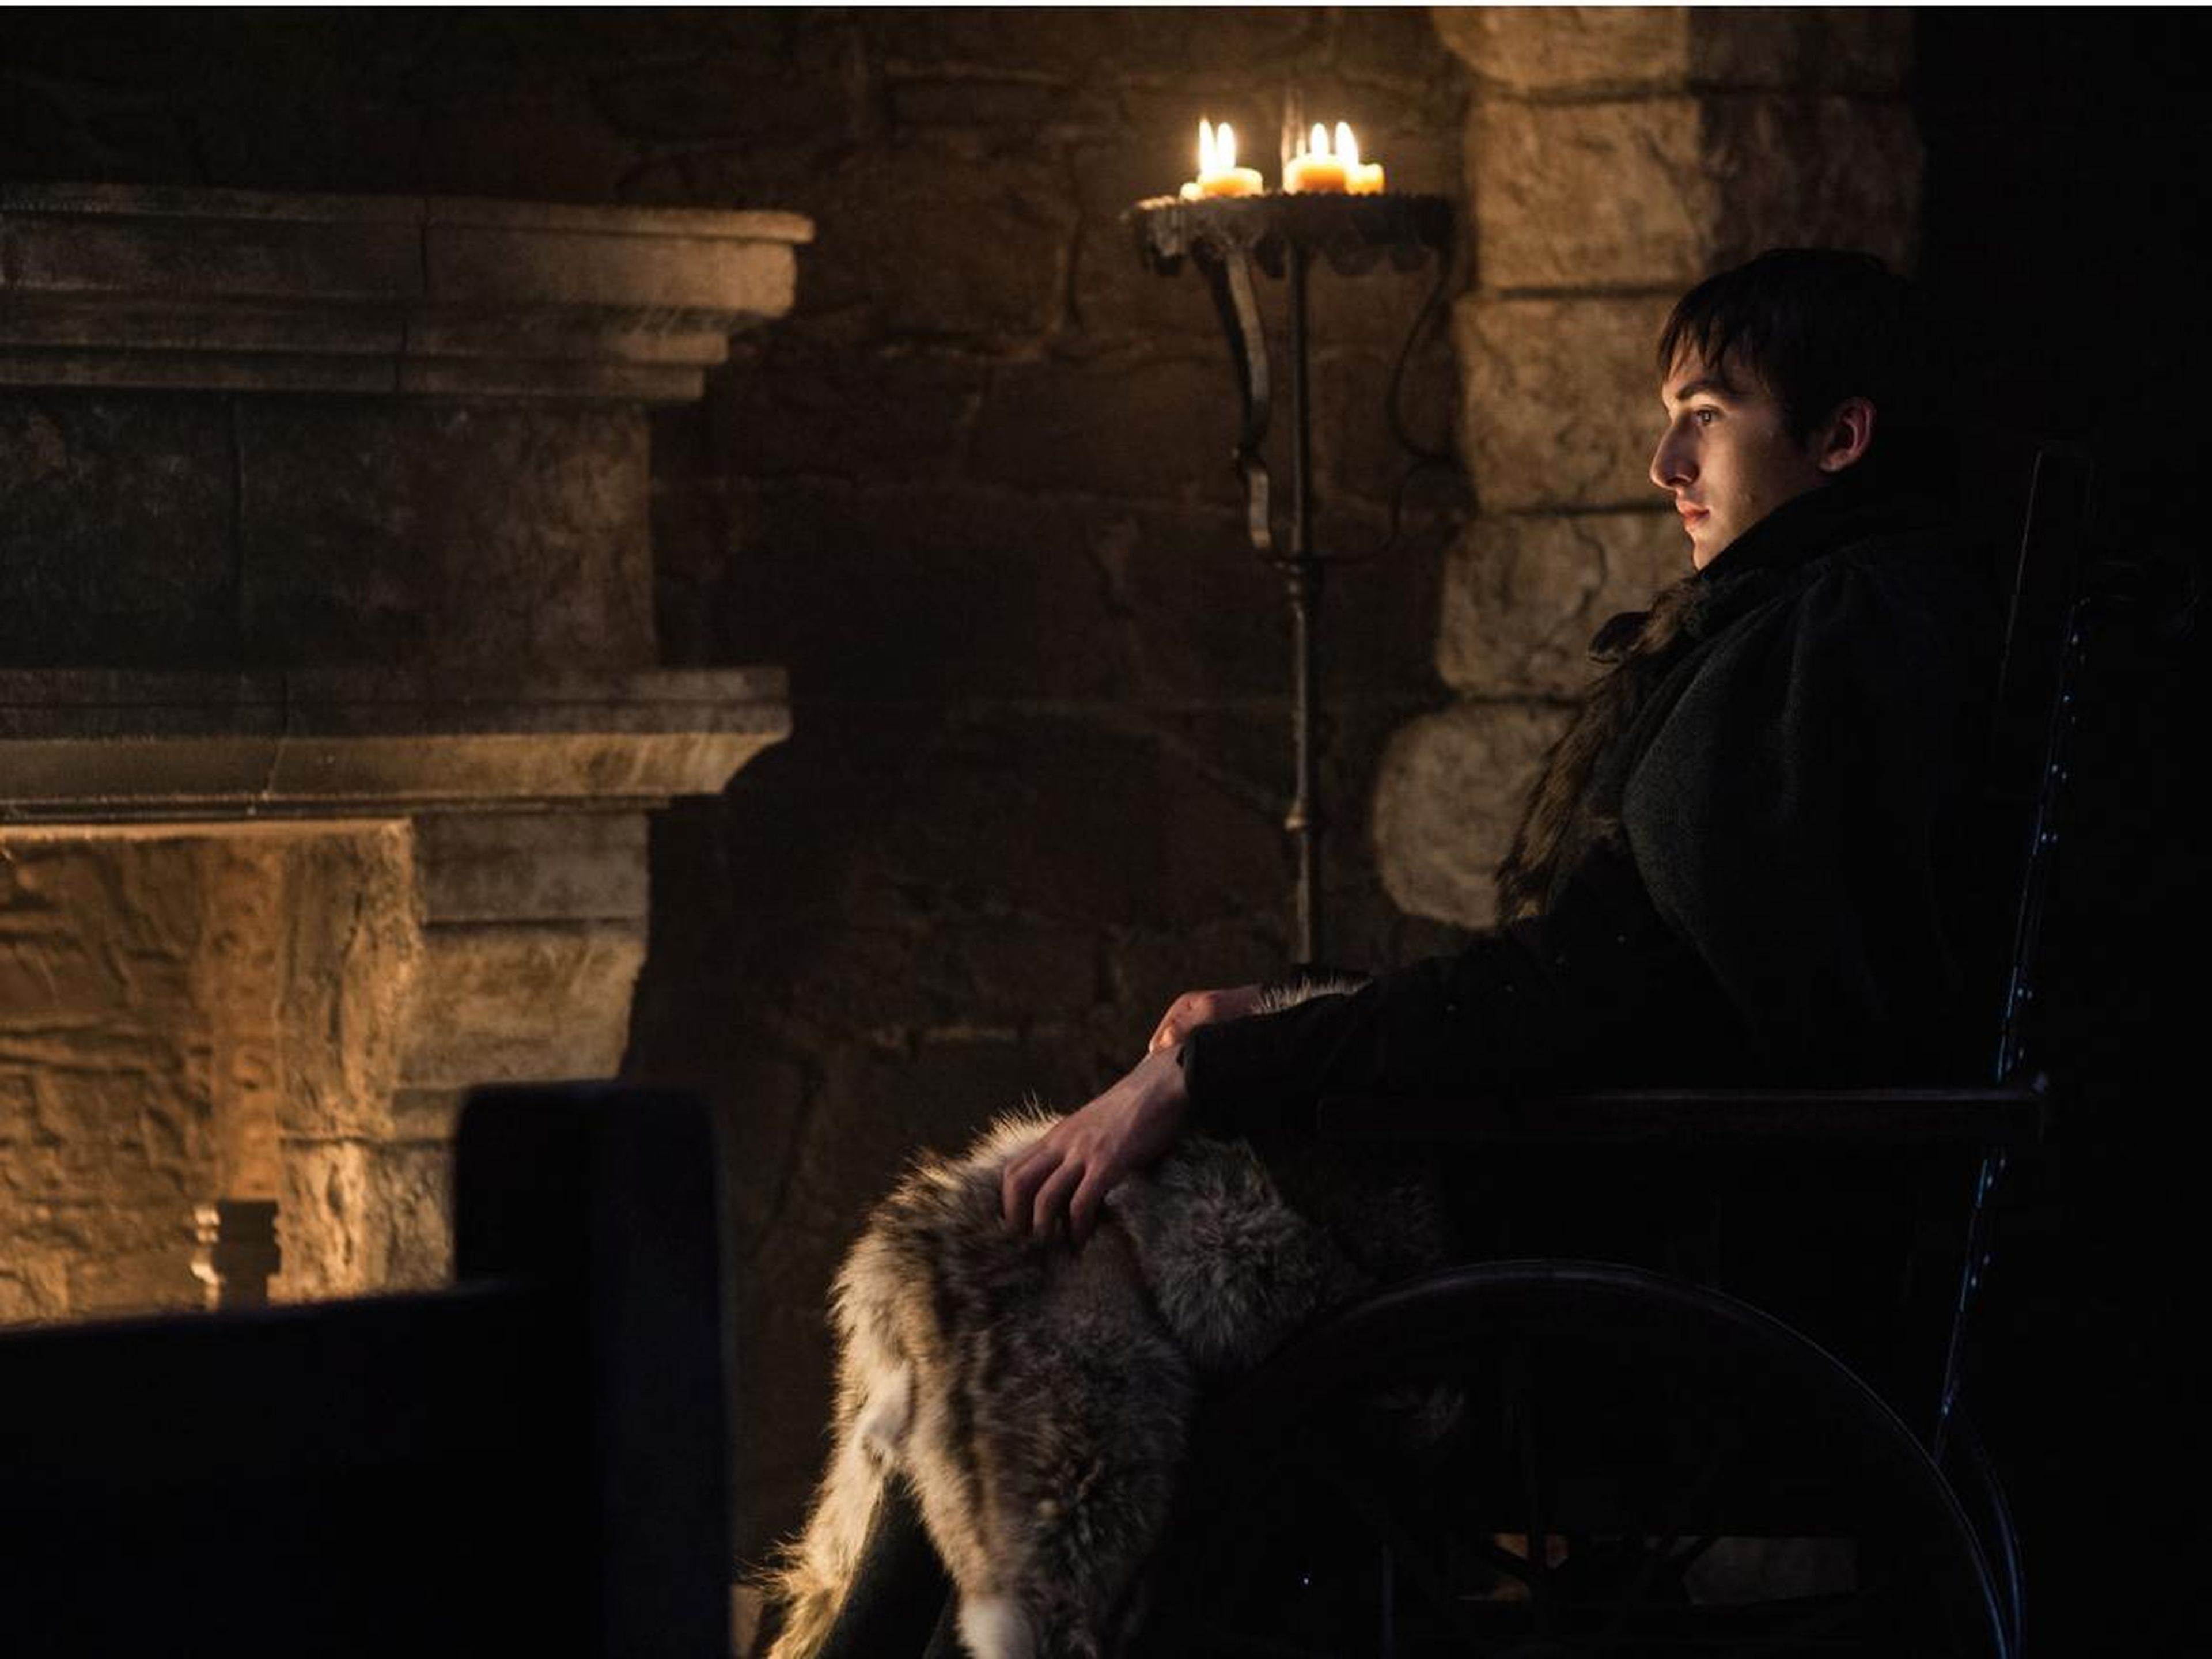 Who will Bran tell?